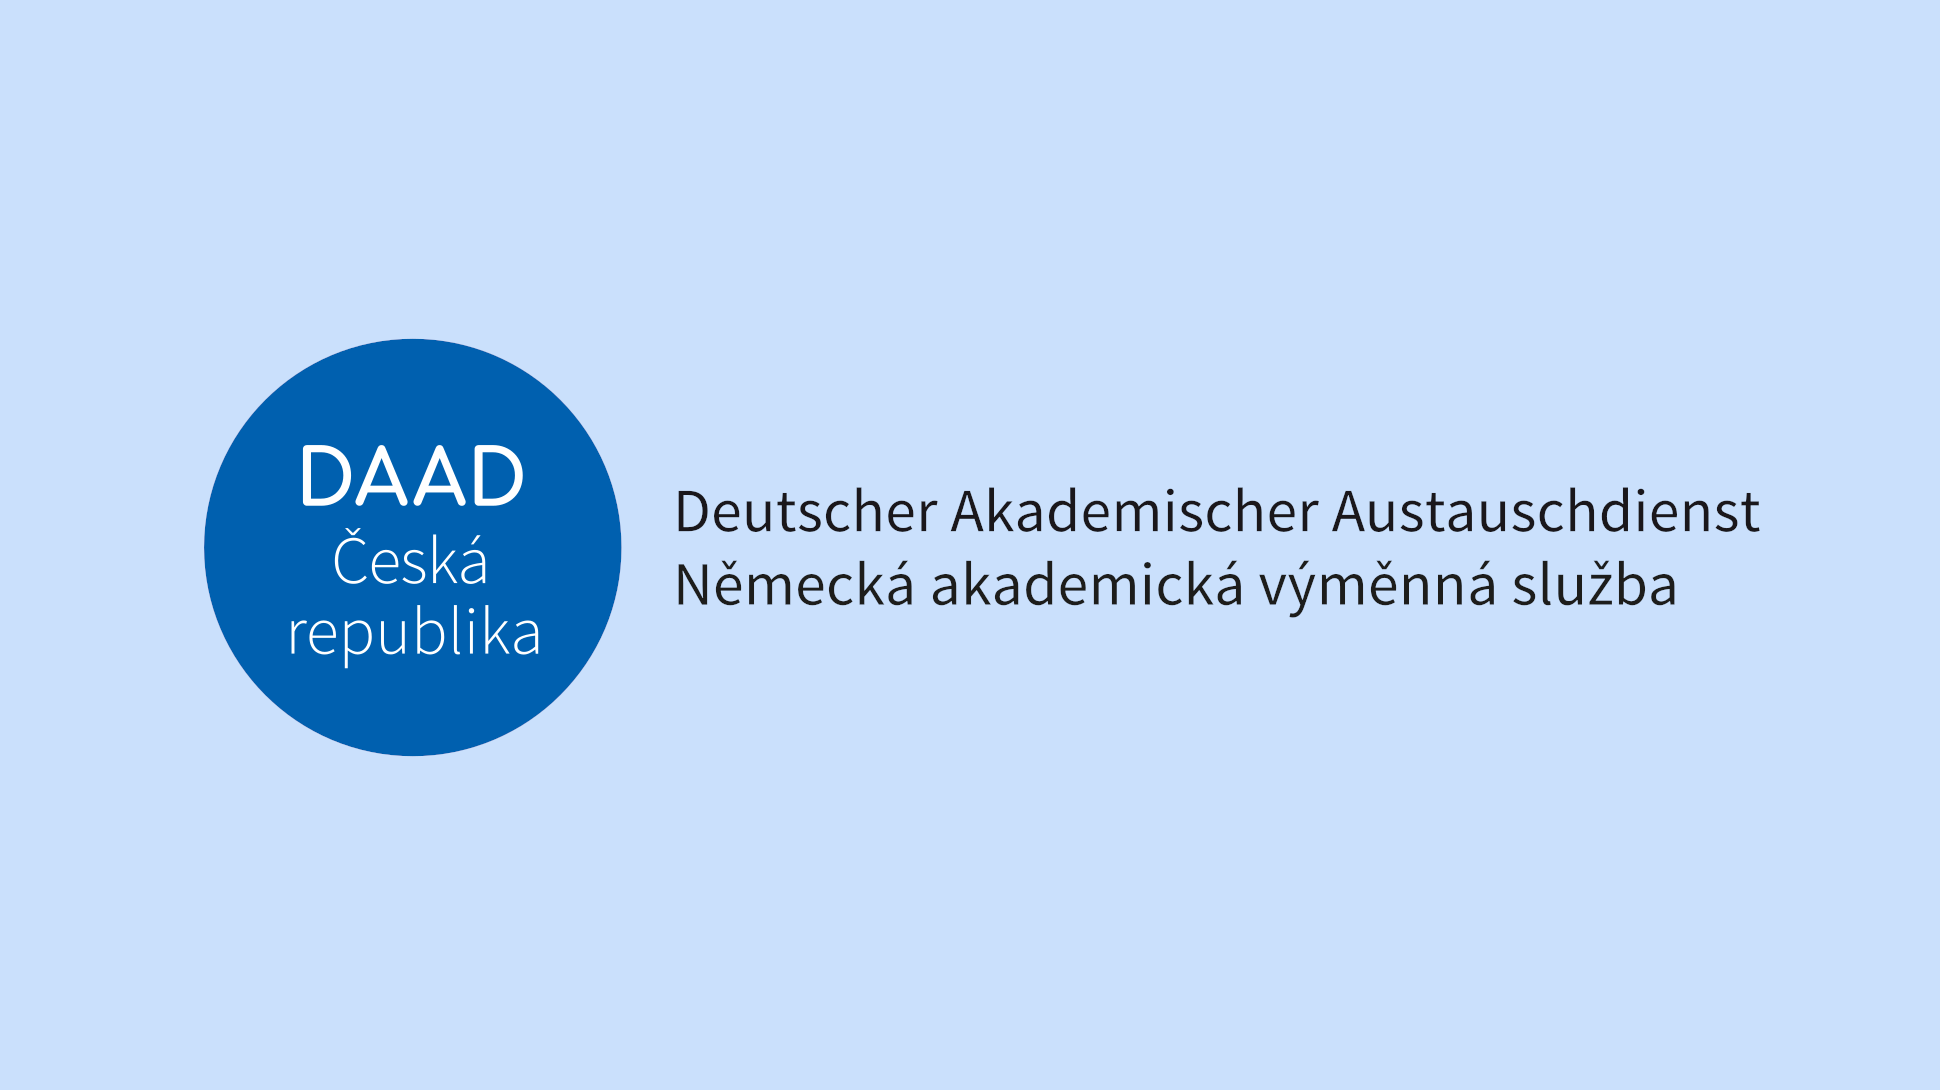 The scholarship from DAAD is open for applications